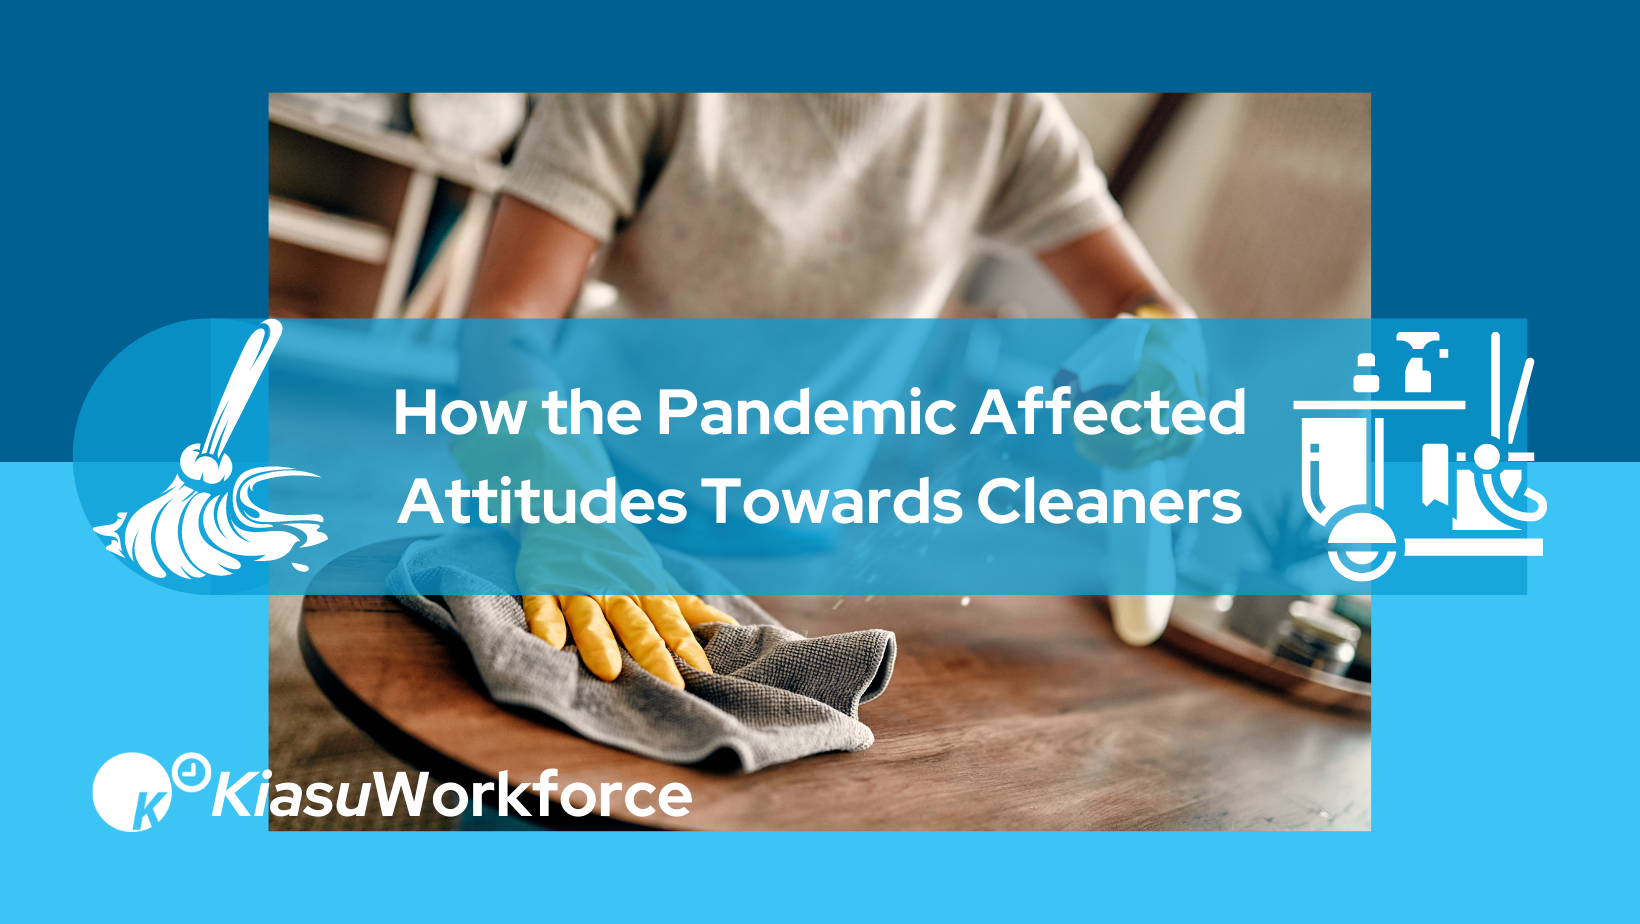 How The Pandemic Affected Attitudes Towards Cleaners